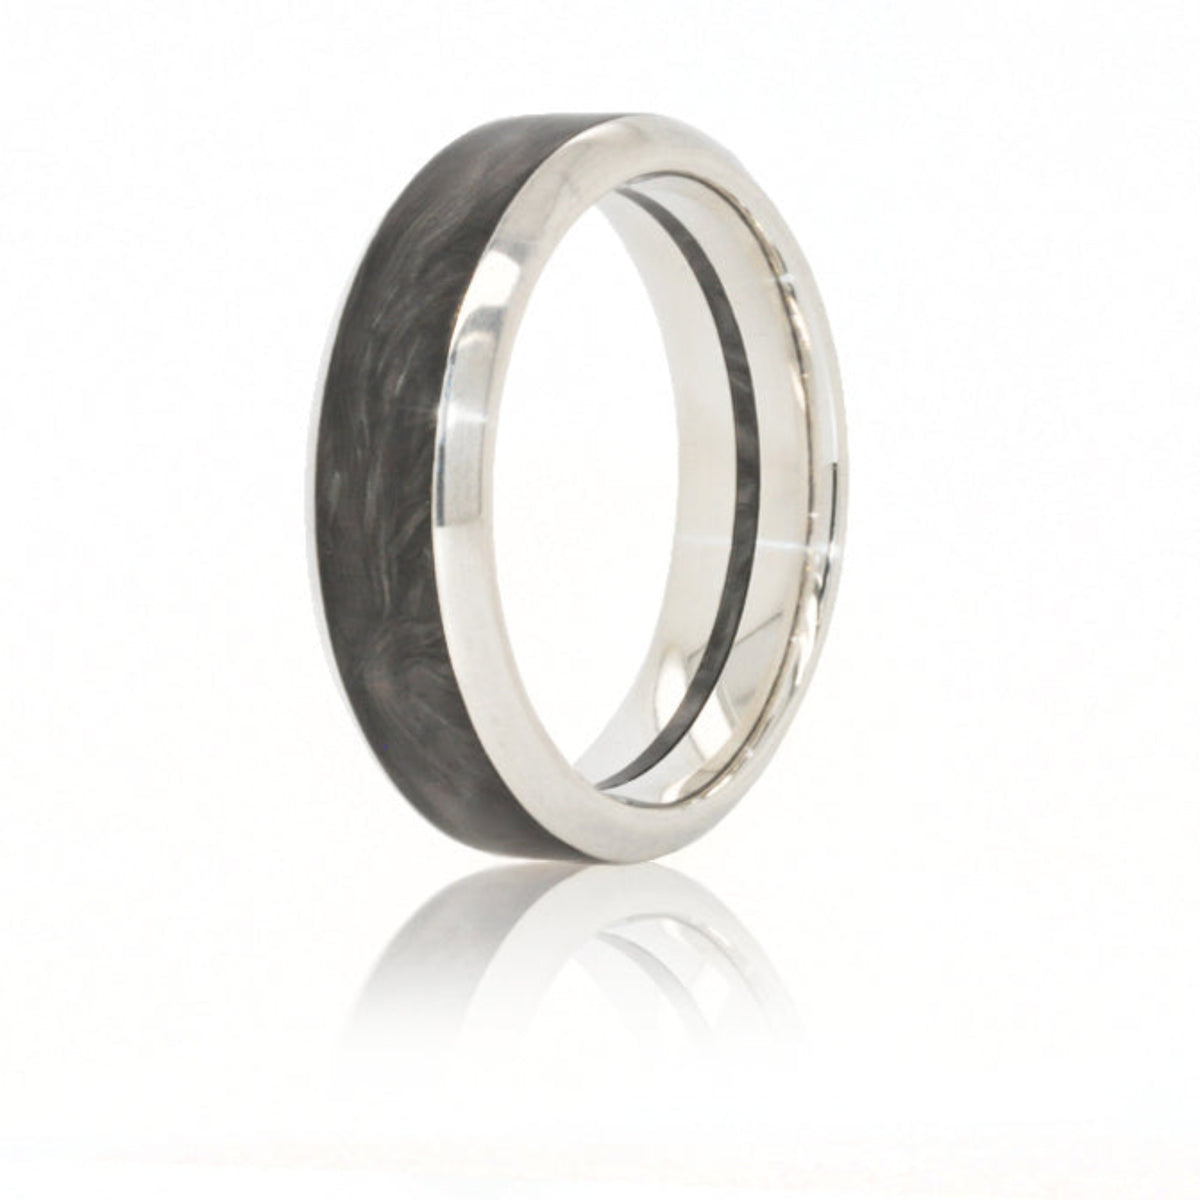 Wedding Band featuring a forged carbon fiber exterior with white gold edging, and a White Gold interior with center Forged Carbon Fiber stripe. 